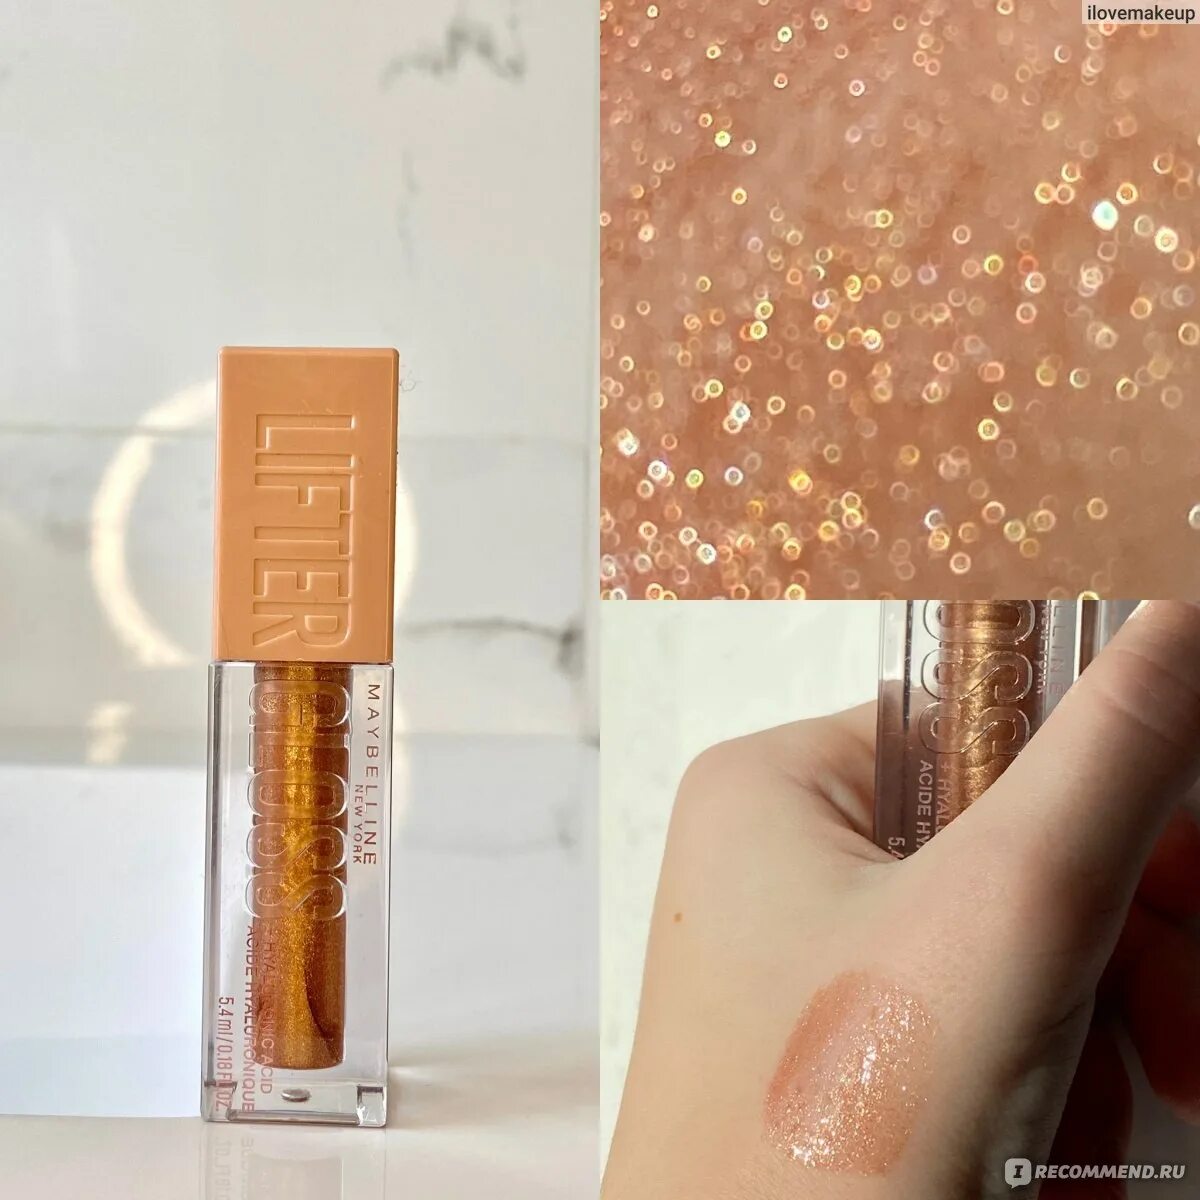 Maybelline Lifter Gloss Crystal. Maybelline New York Lifter Gloss 010 Crystal. Блеск мейбелин свотчи. Блеск Maybelline Lifter Gloss 009 Topaz.